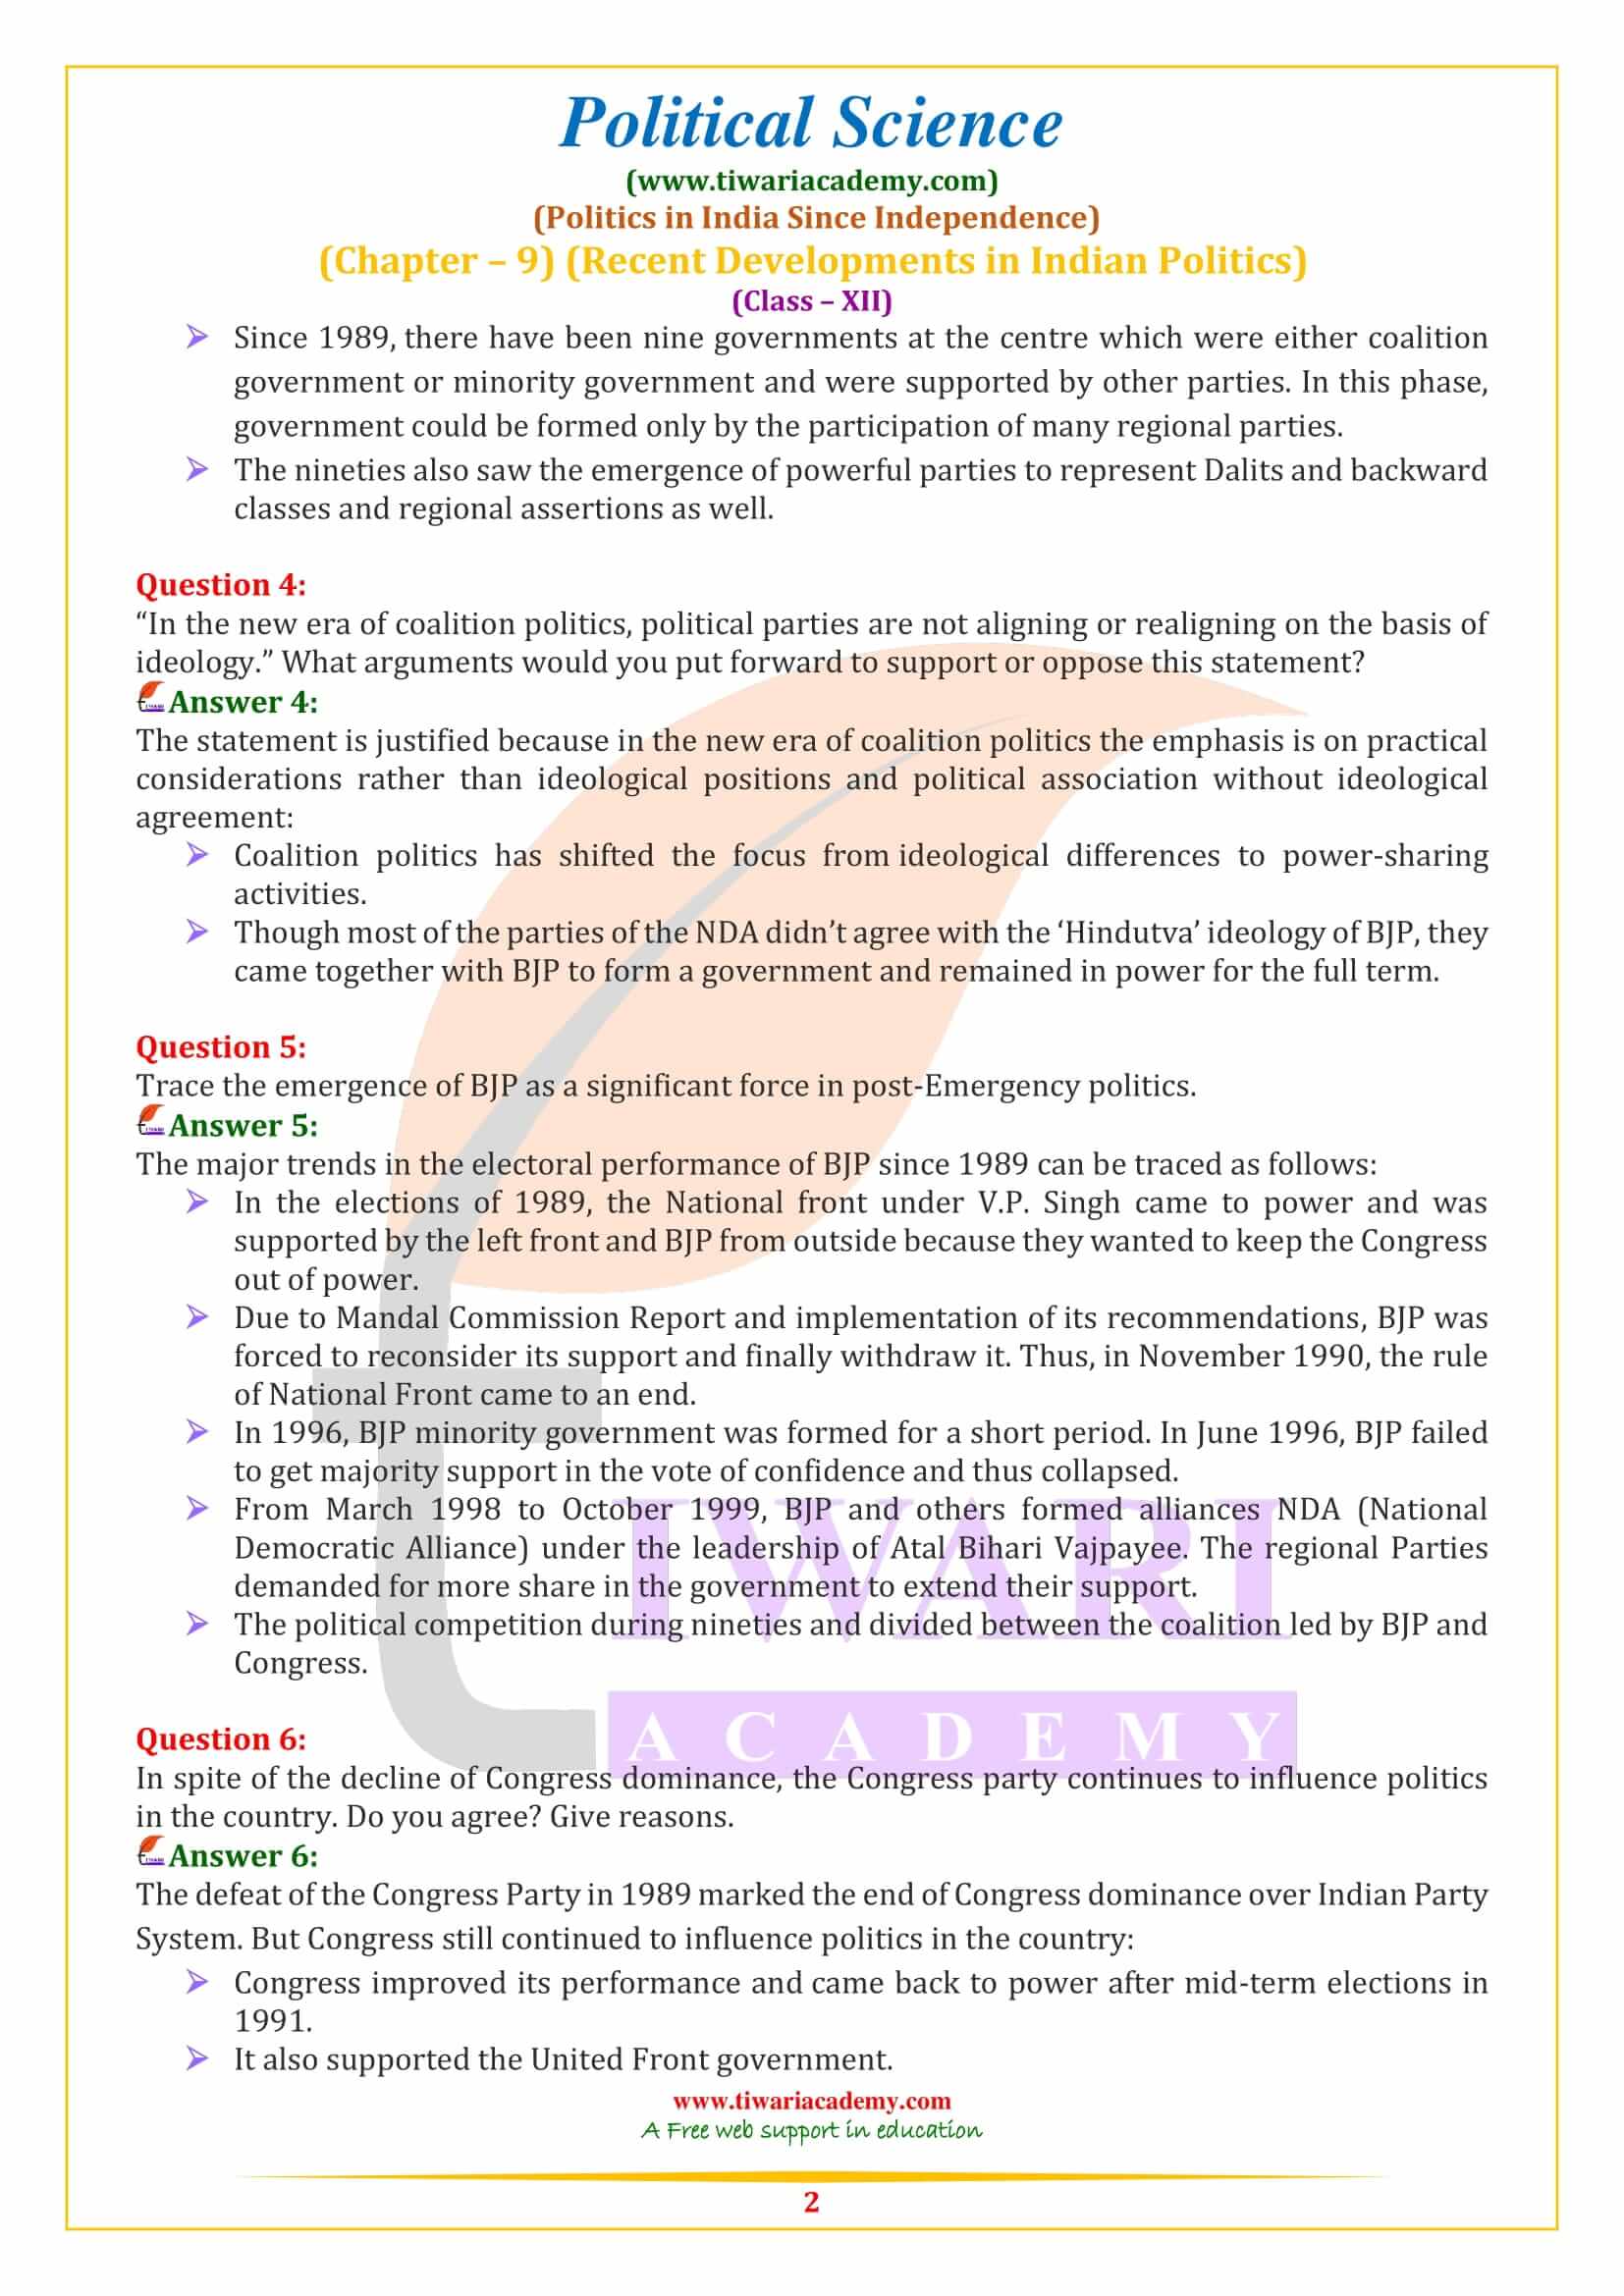 NCERT Solutions for Class 12 Political Science Part 2 Chapter 9